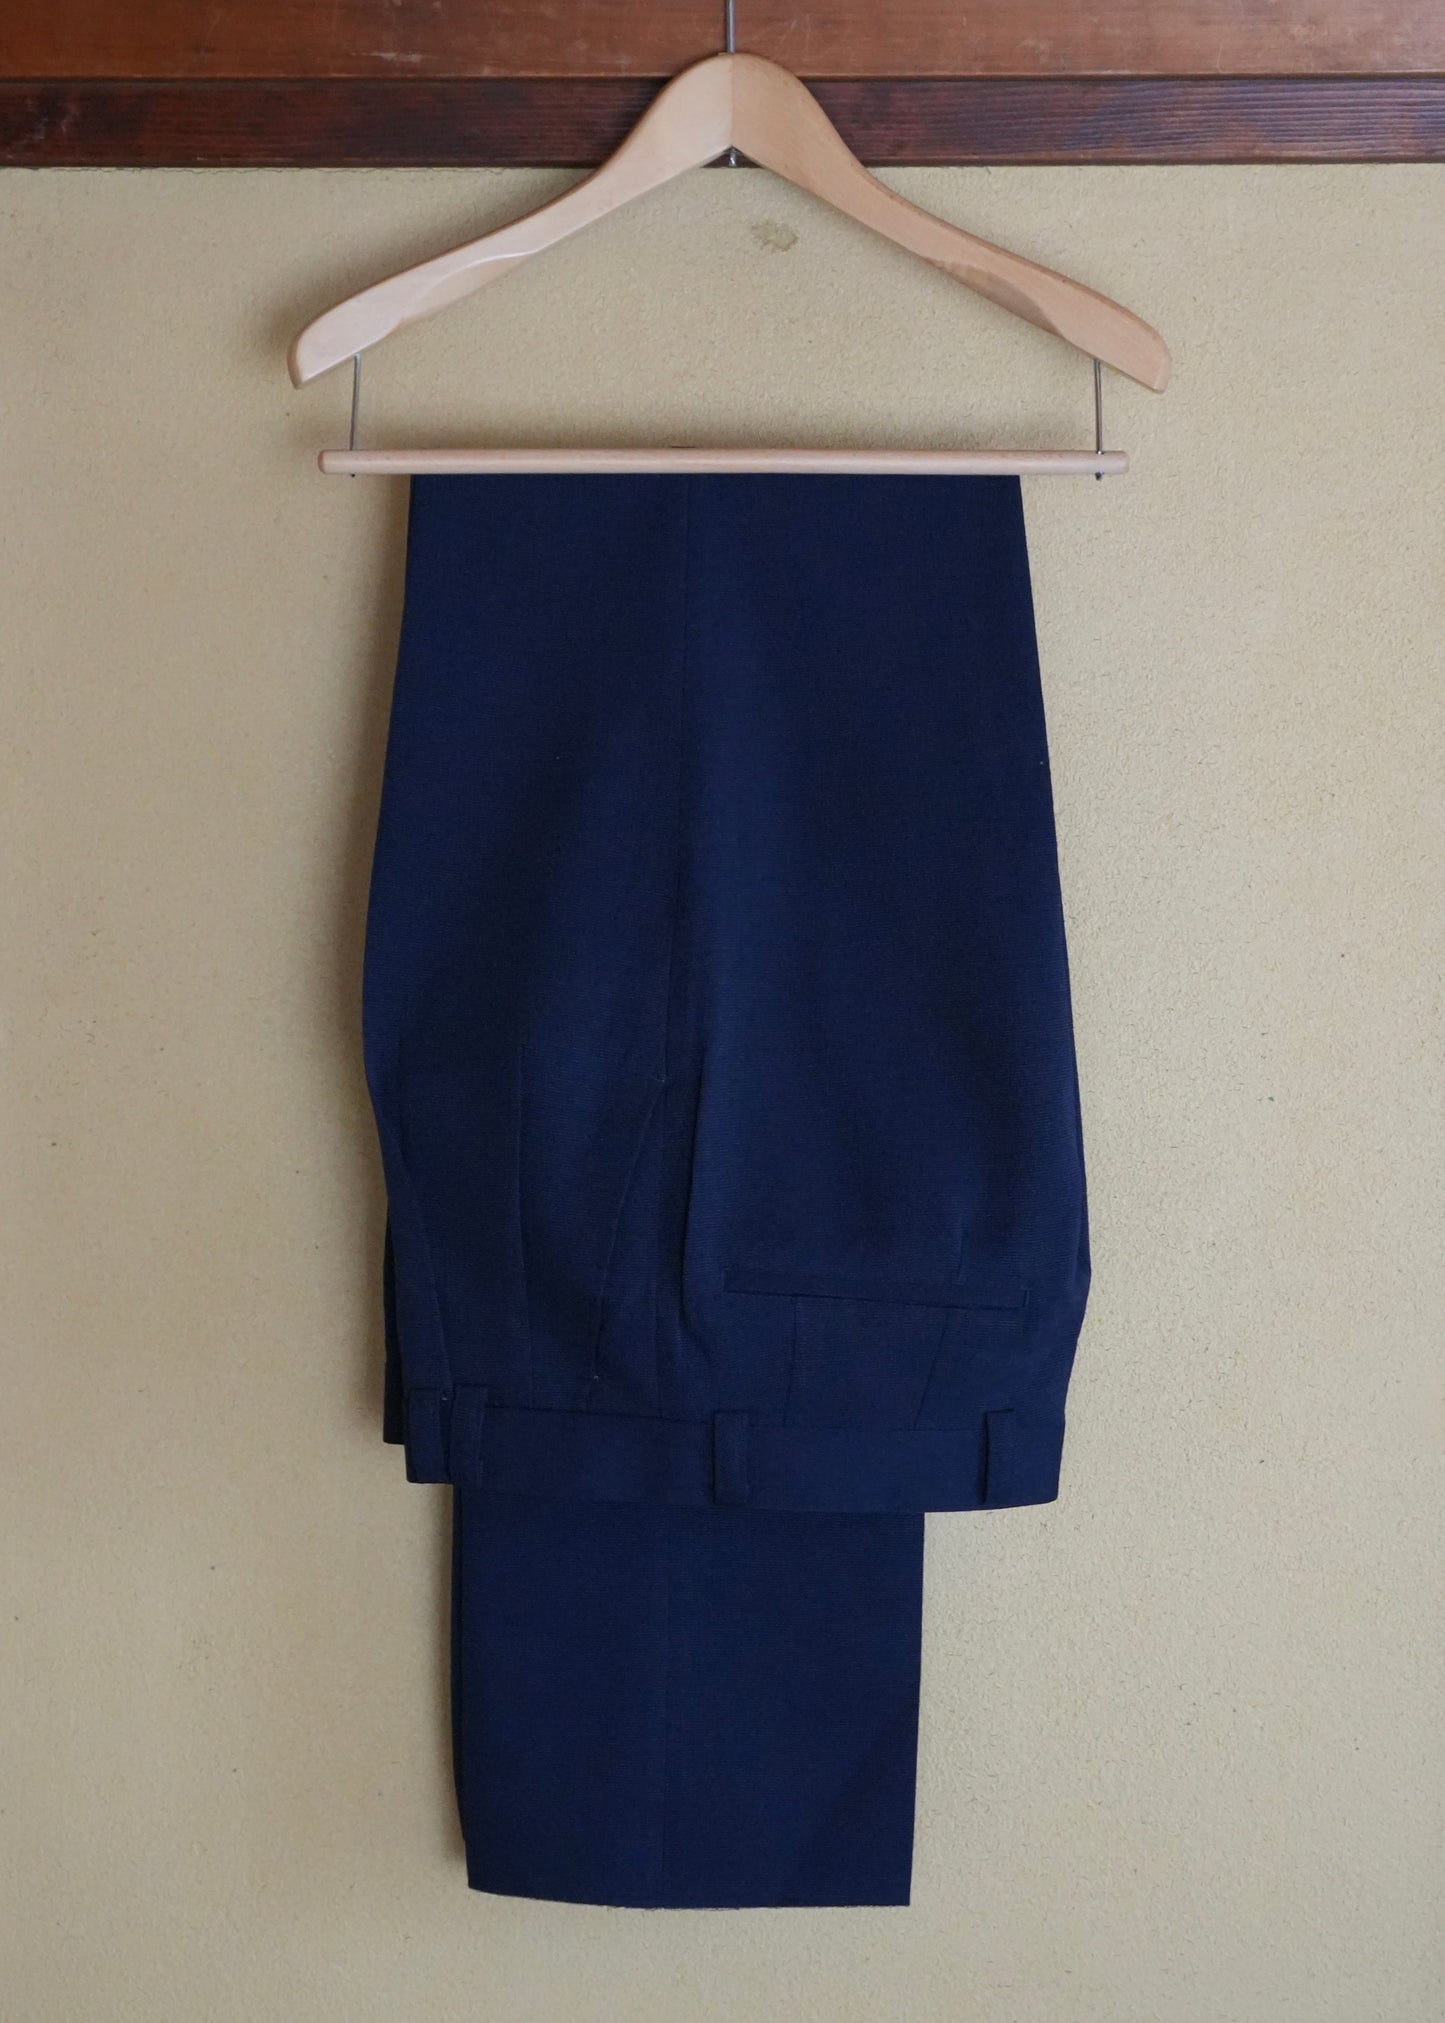 Double Pleated Navy Pants